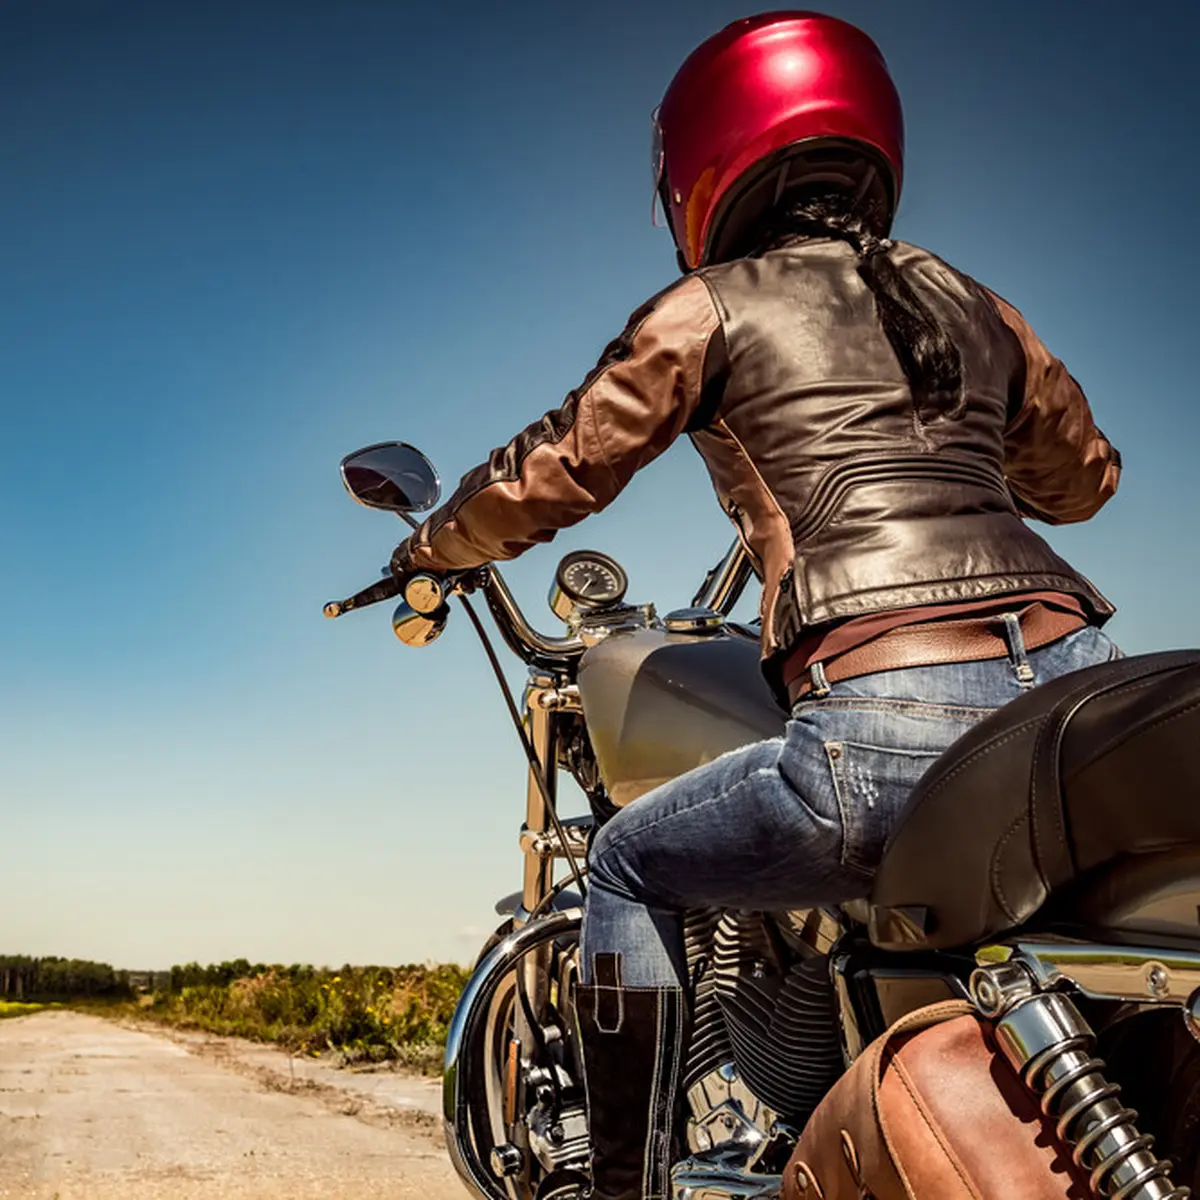 brenda faust recommends pictures of biker woman pic